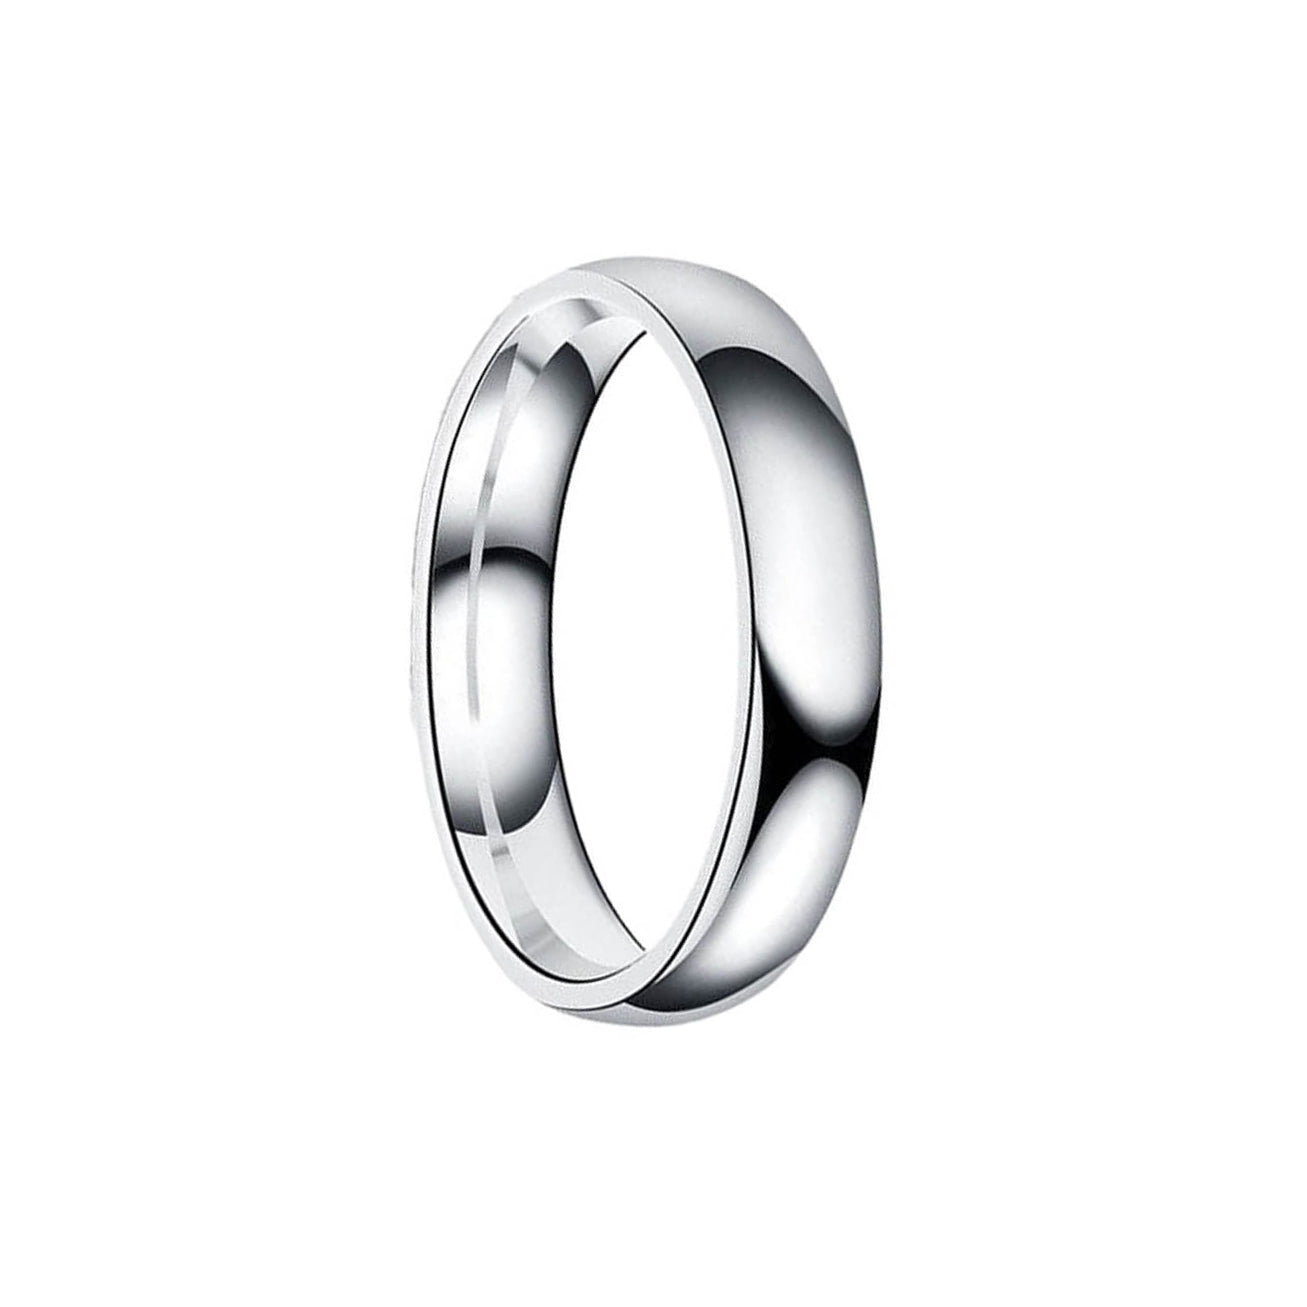 Curved polished steel ring 4mm